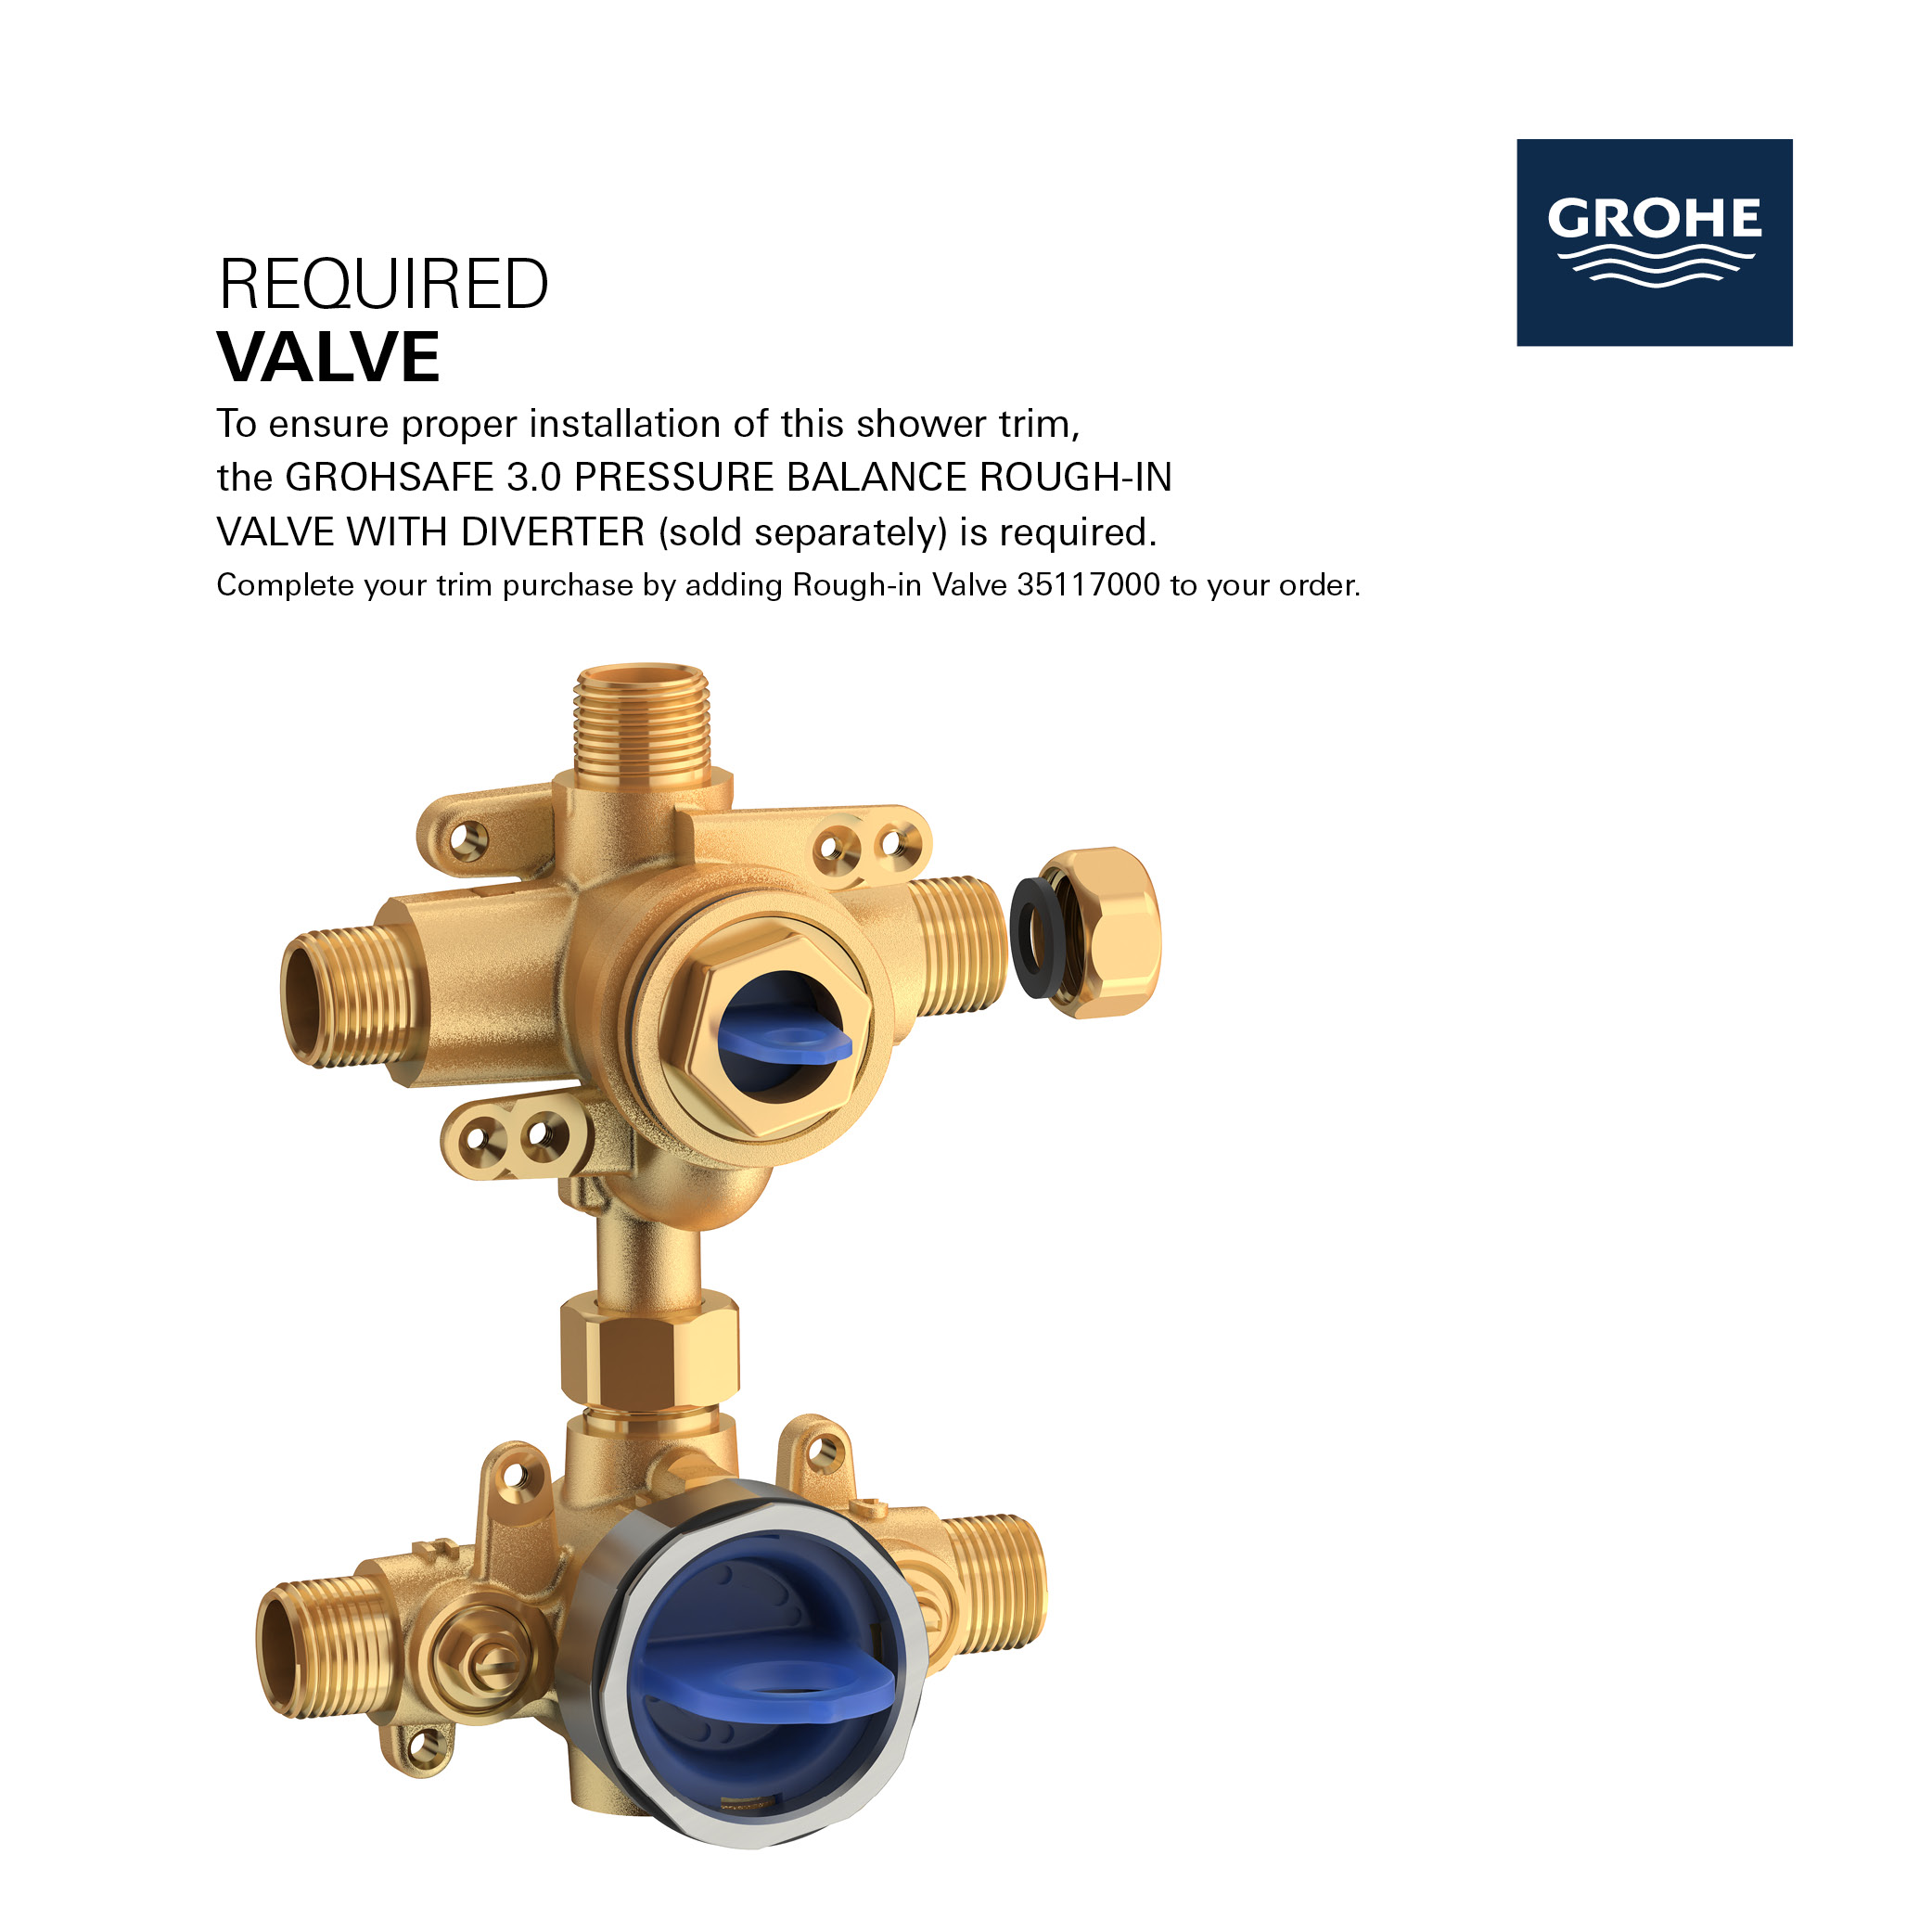 LINEARE PRESSURE BALANCE VALVE TRIM WITH 2-WAY DIVERTER WITH CARTRIDGE